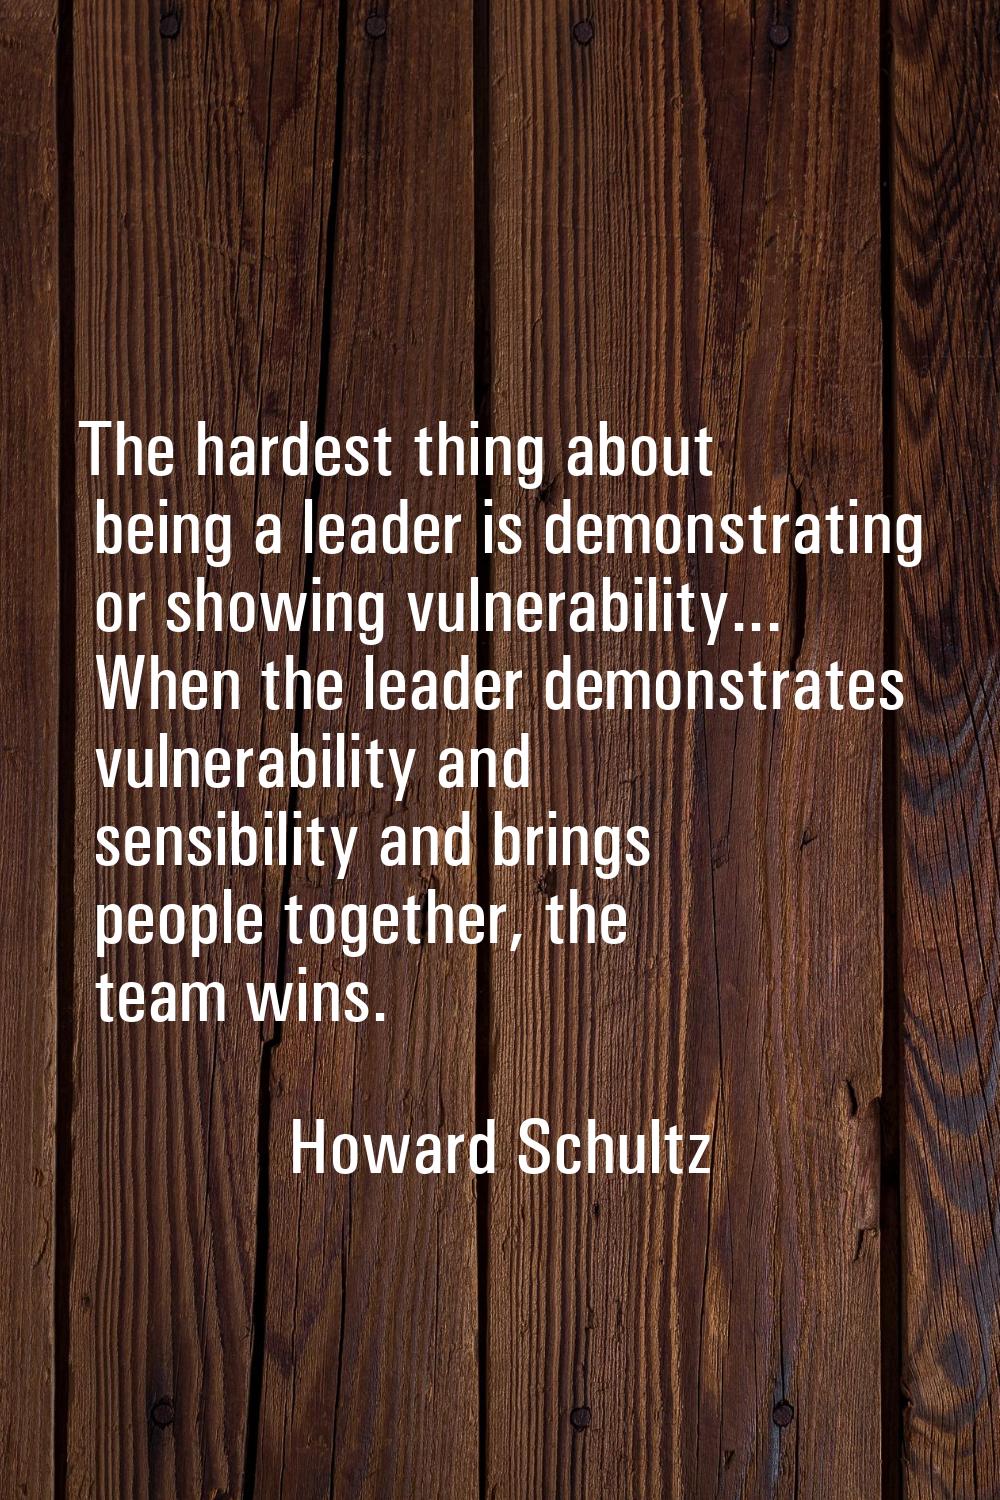 The hardest thing about being a leader is demonstrating or showing vulnerability... When the leader